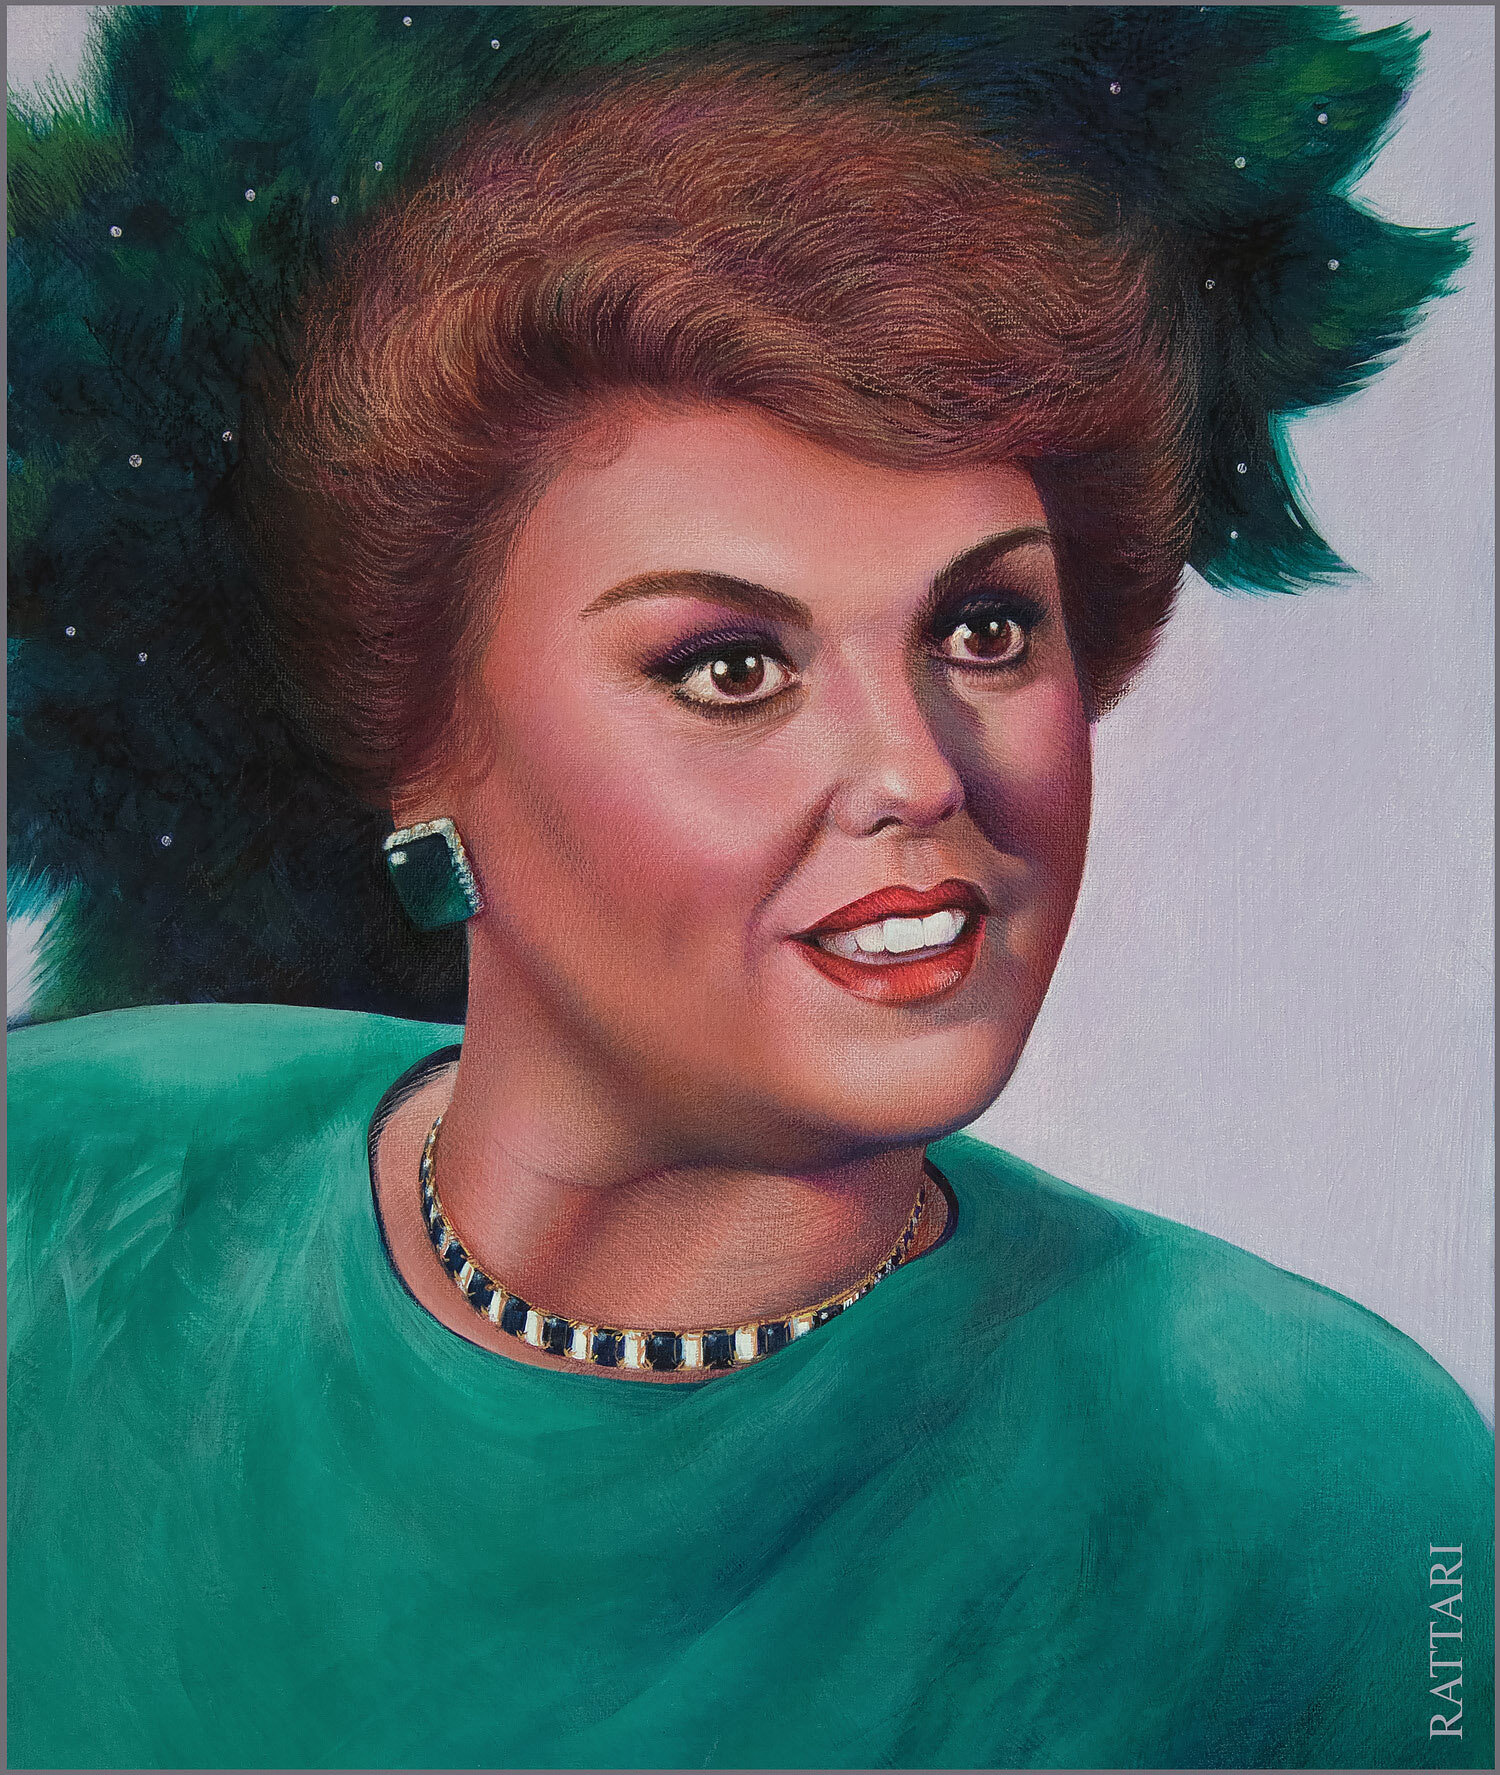 Tyne Daly as Dolores, Columbo: A Bird In The Hand, acrylics and color pencils on canvas, 16x20in